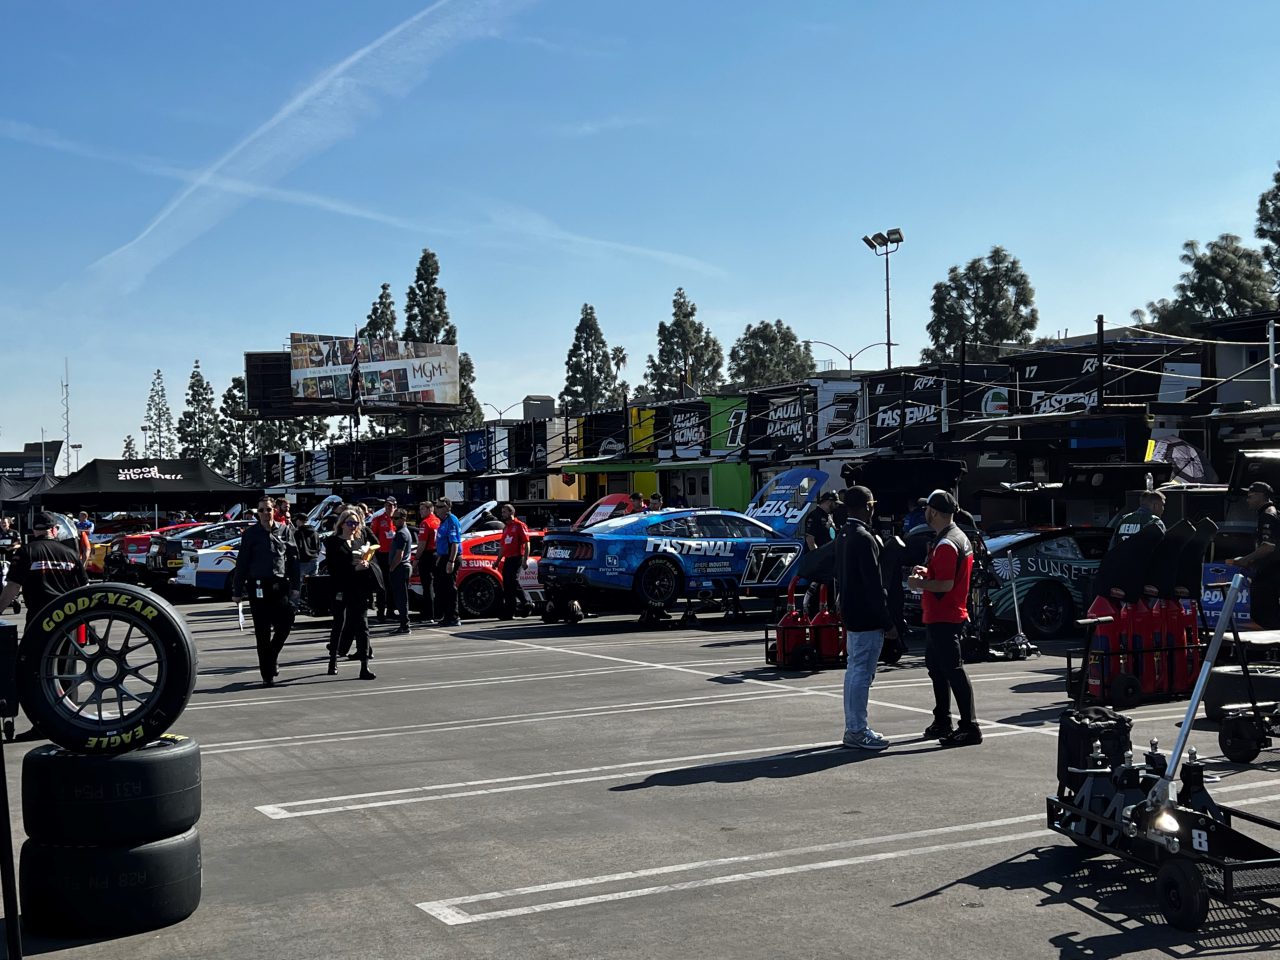 Garage area on Saturday morning at the L.A. Coliseum (Photo by David P. Castro)